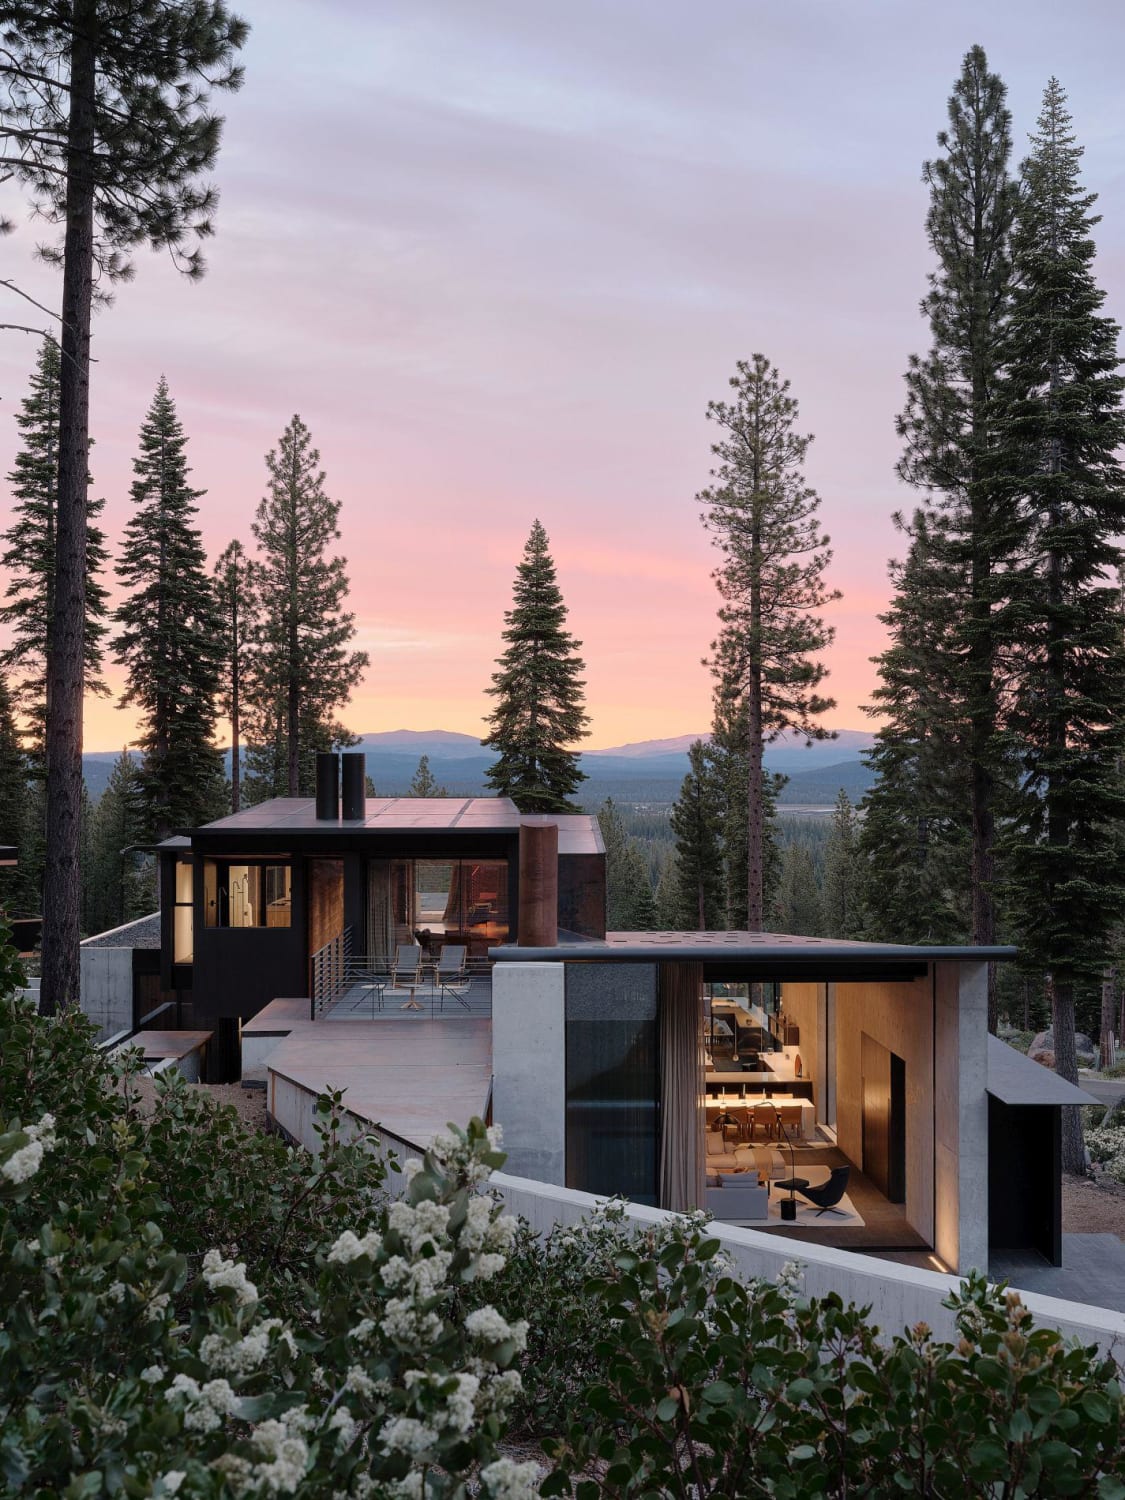 Vacation home on a challenging mountain slope near Lake Tahoe, Truckee, California by Faulkner Architects (Photo: Joe Fletcher)